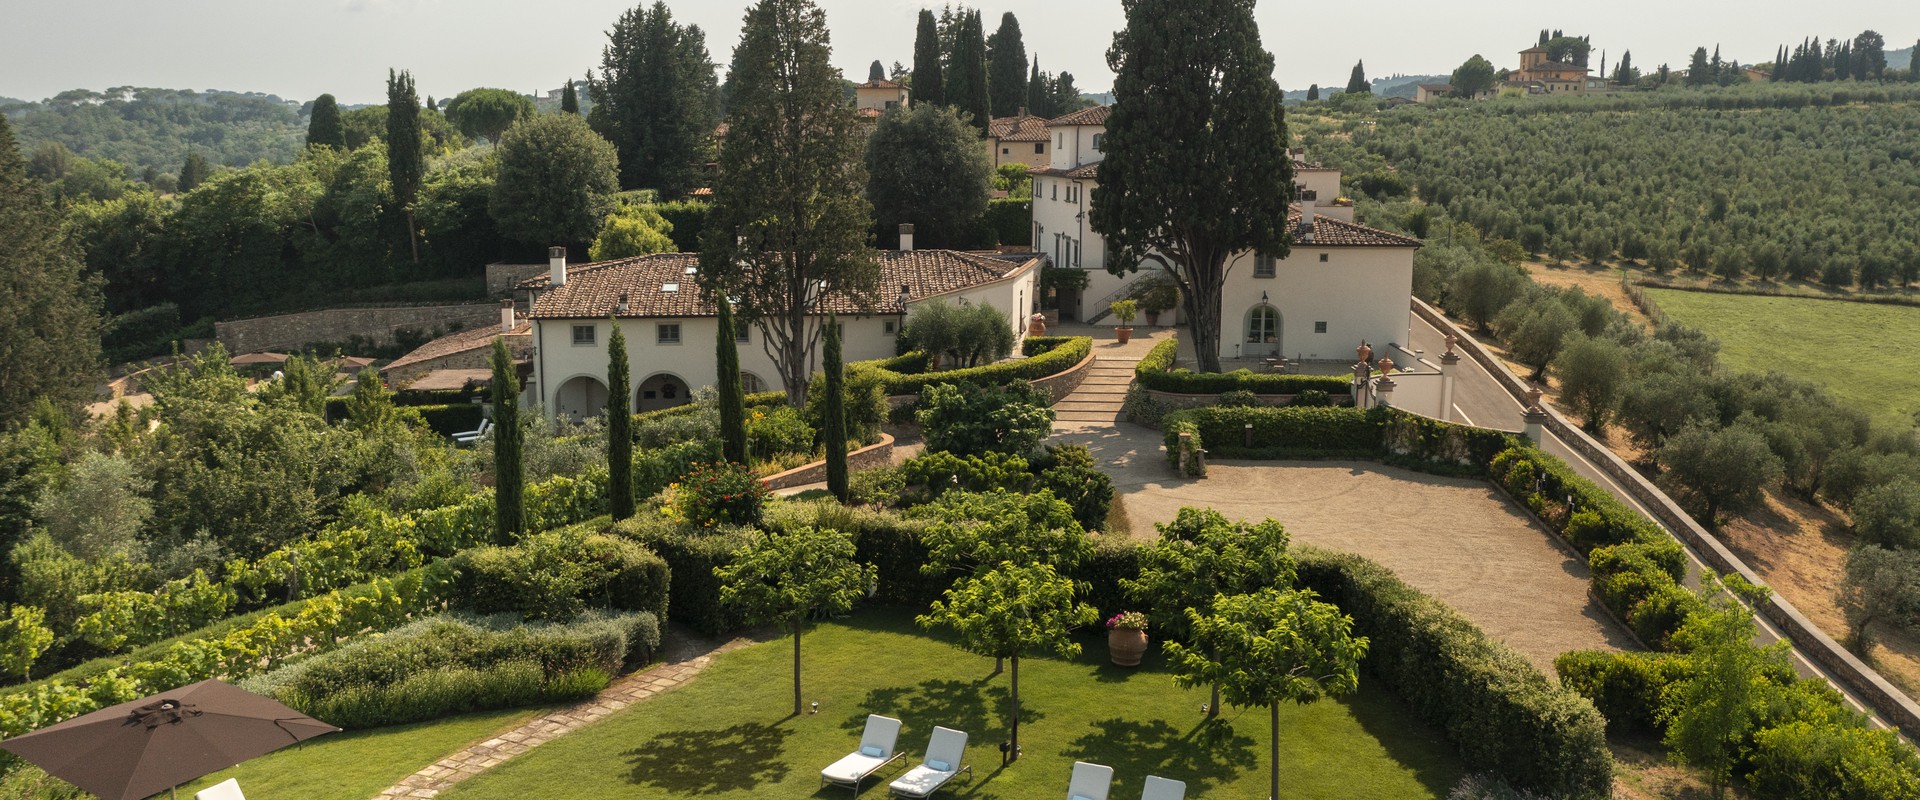  Experience Timeless Luxury at Dimora Ghirlandaio: A Journey Through Tuscany's Rich Heritage